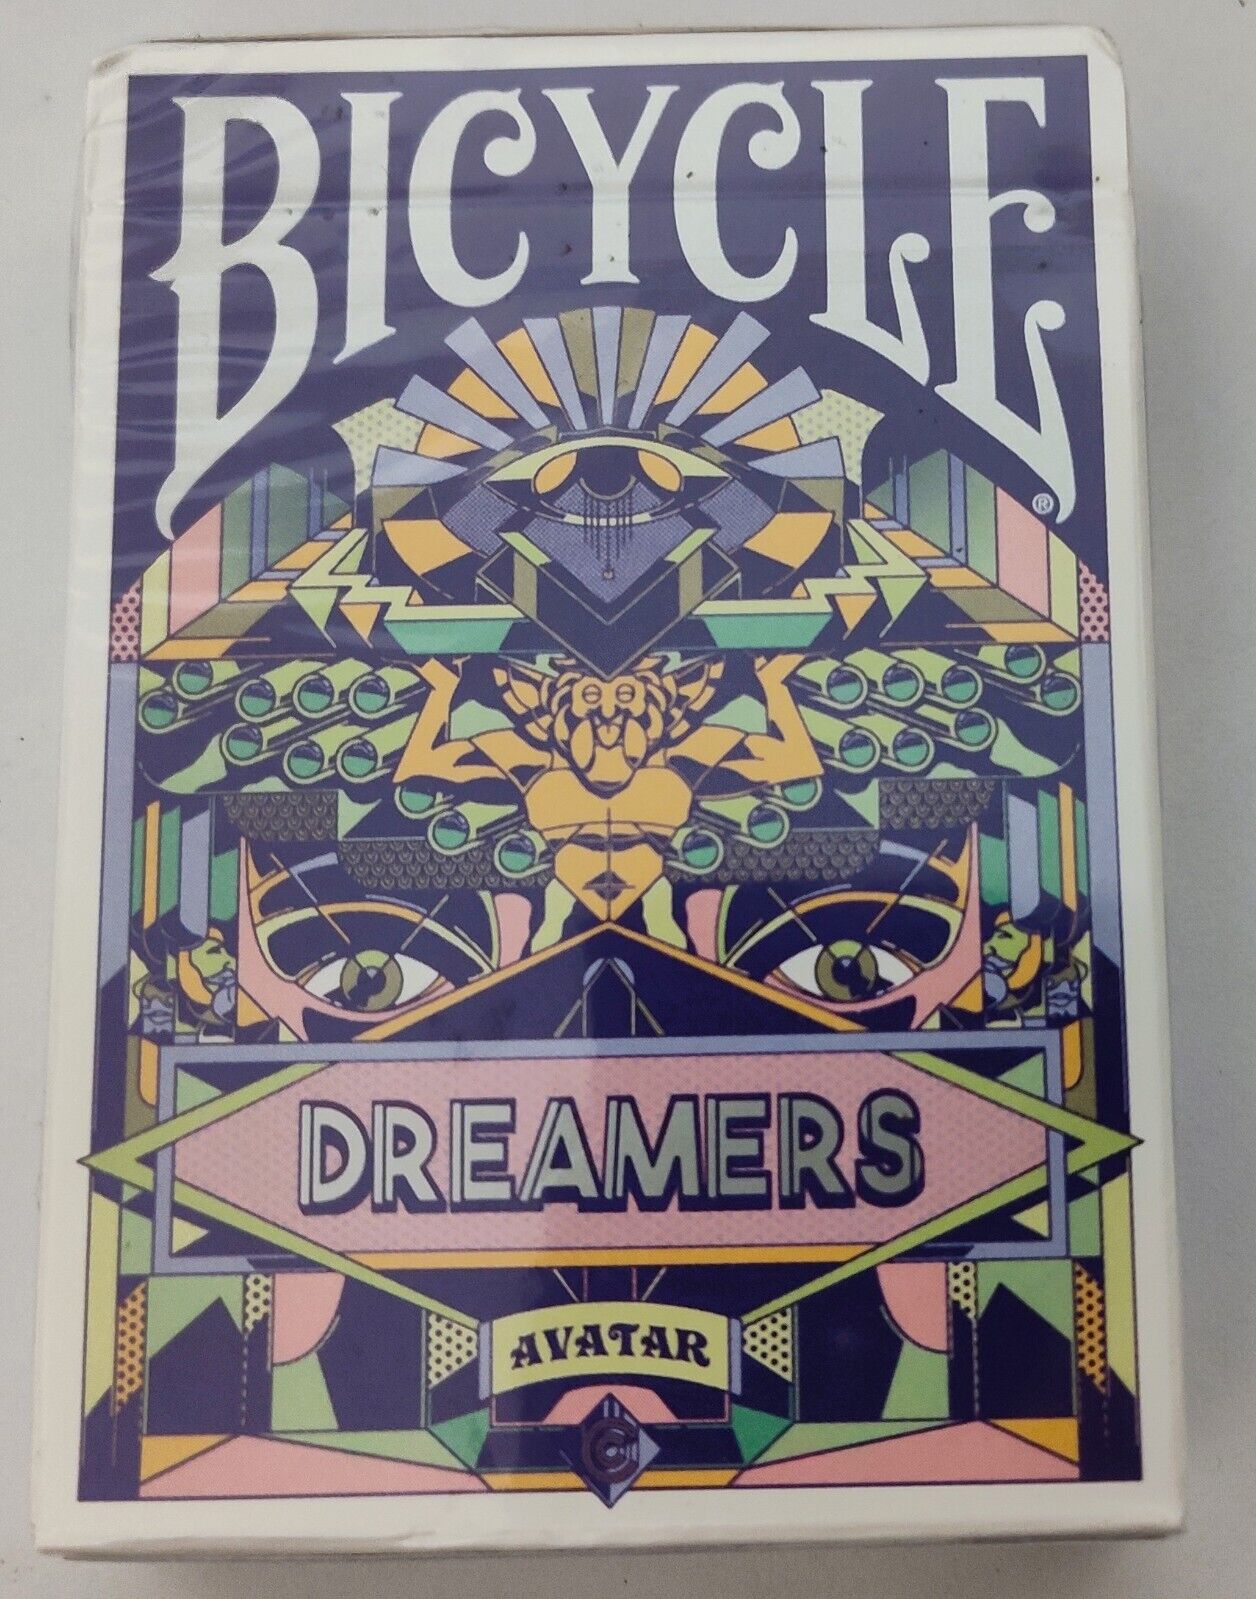 NEW 2019 Bicycle Dreamers Avatar Playing Cards – Limited Edition to 1500 Decks